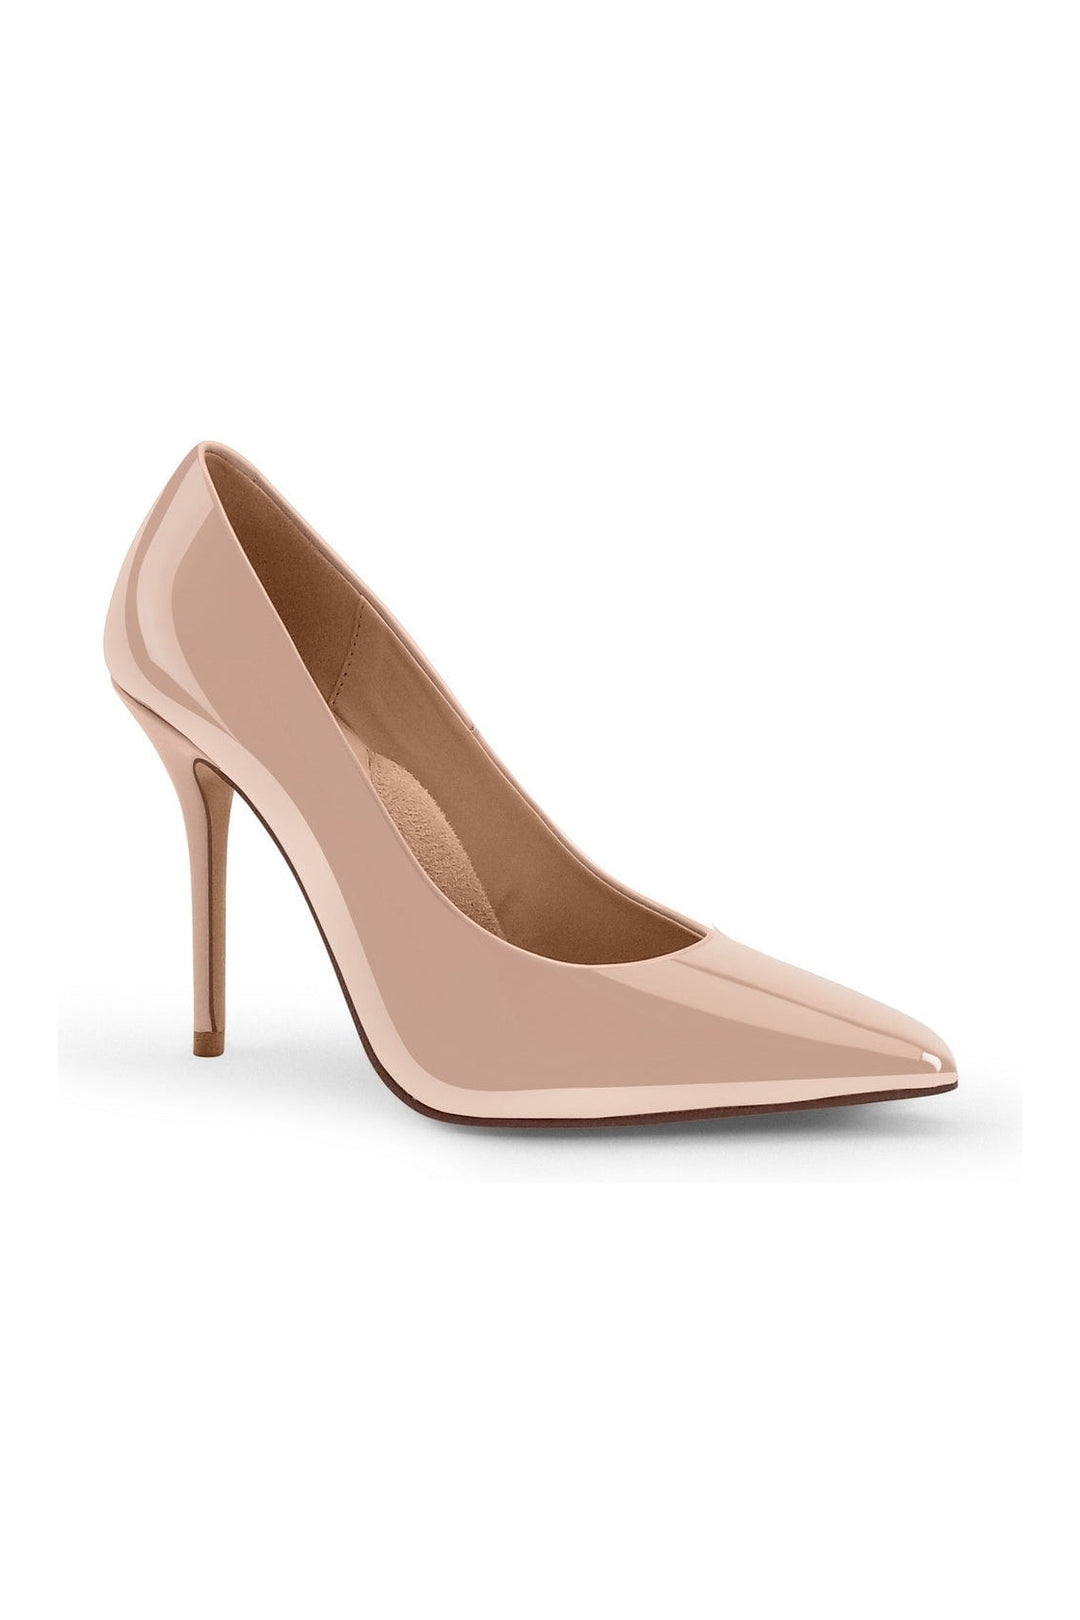 Super Sexy Classic Pump with Micro Stiletto Heel-Pumps-Sexyshoes Signature-Nude-SEXYSHOES.COM